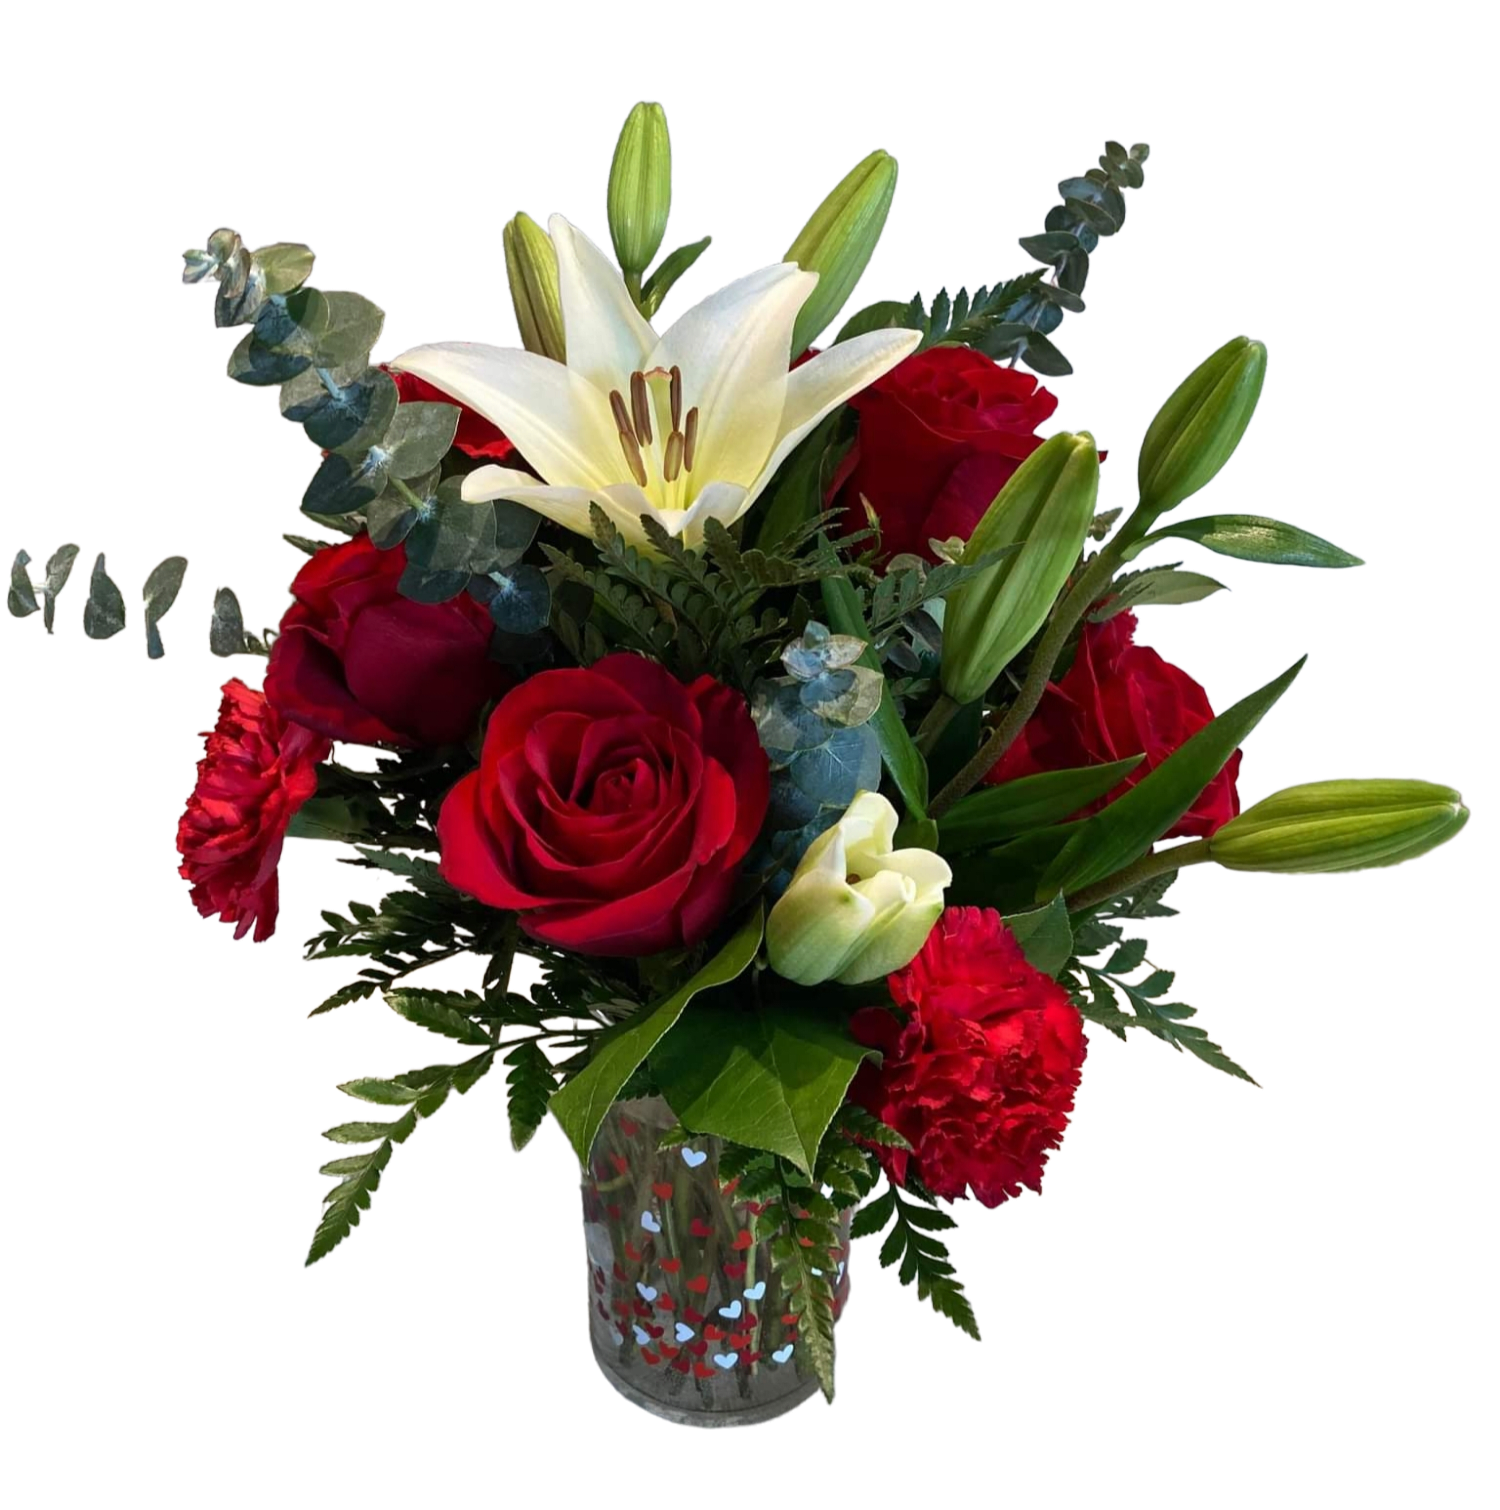 Love Star - Be a Love Star this Valentine's Day with this rockin' design. Beautiful white lilies, roses and carnations make this design POP!